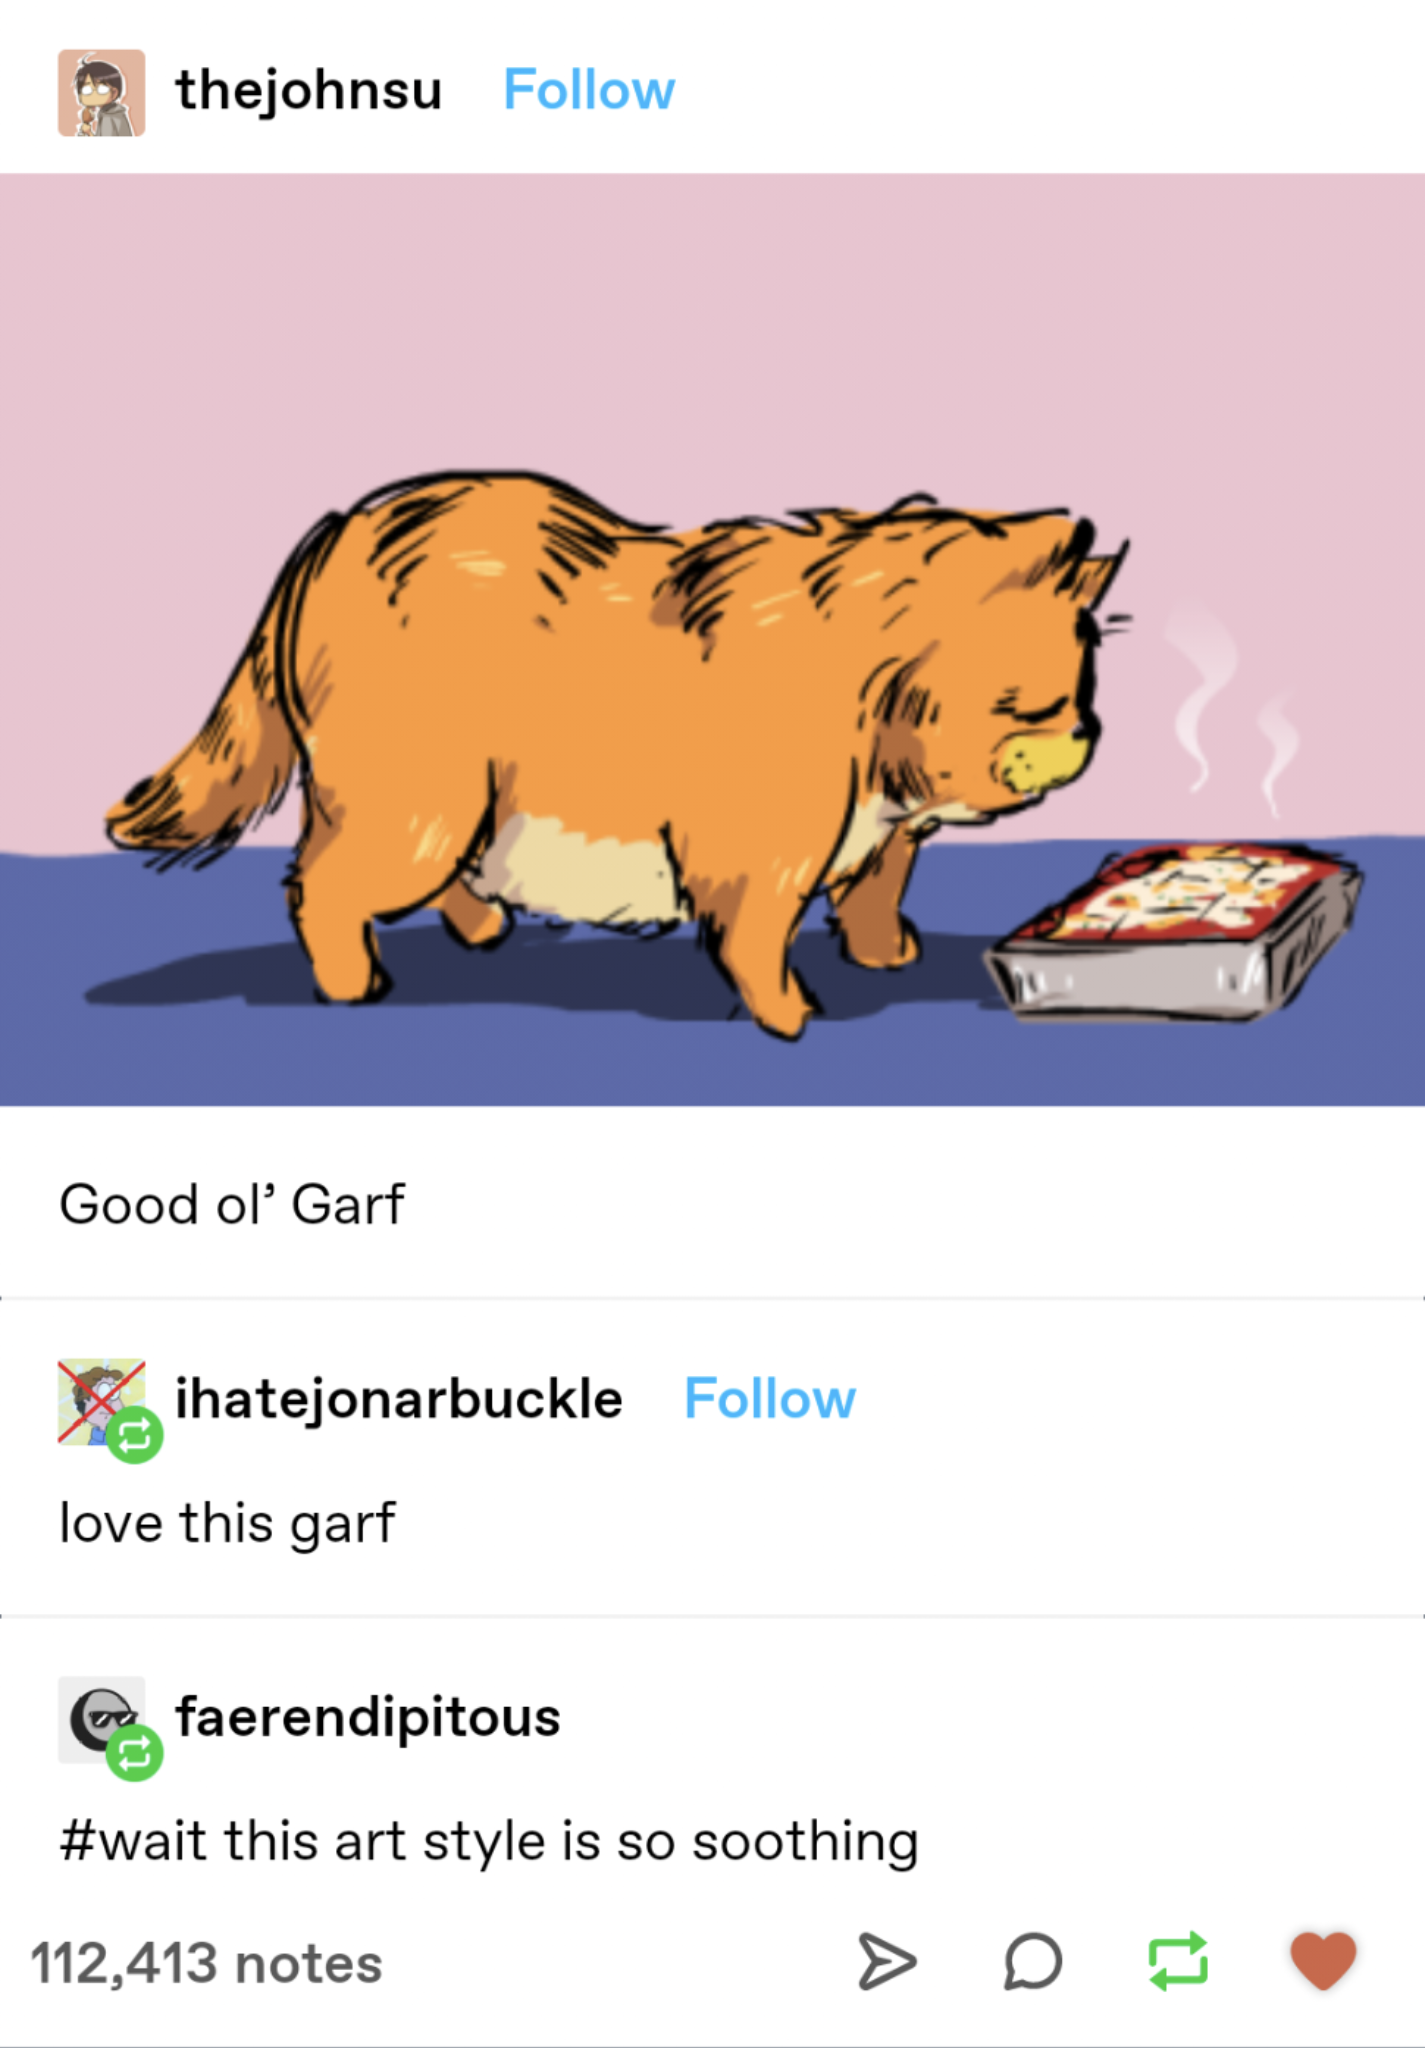 fresh memes - soothing garfield - thejohnsu Good ol' Garf ihatejonarbuckle love this garf faerendipitous this art style is so soothing 112,413 notes